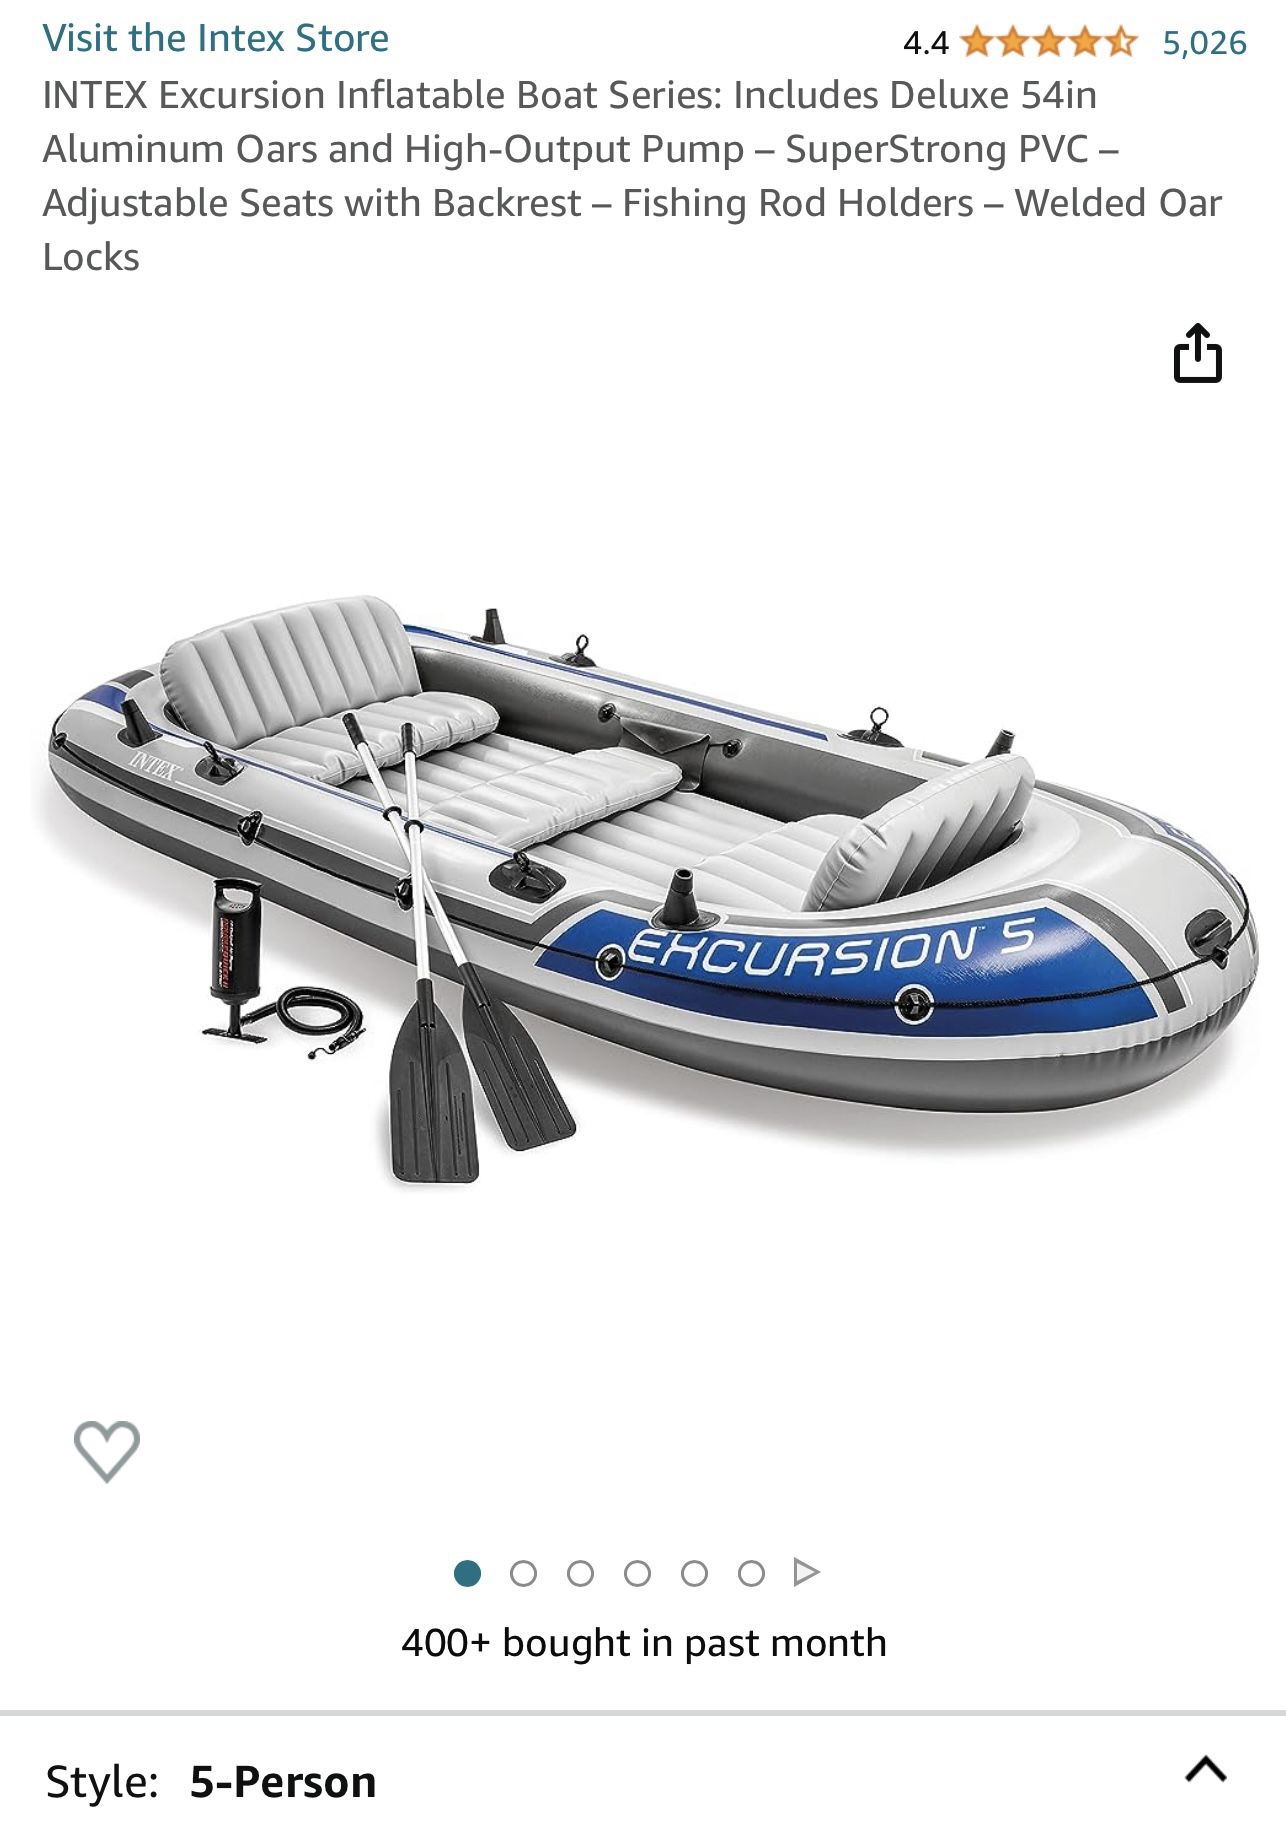 Inflatable Boat With Motor Mount